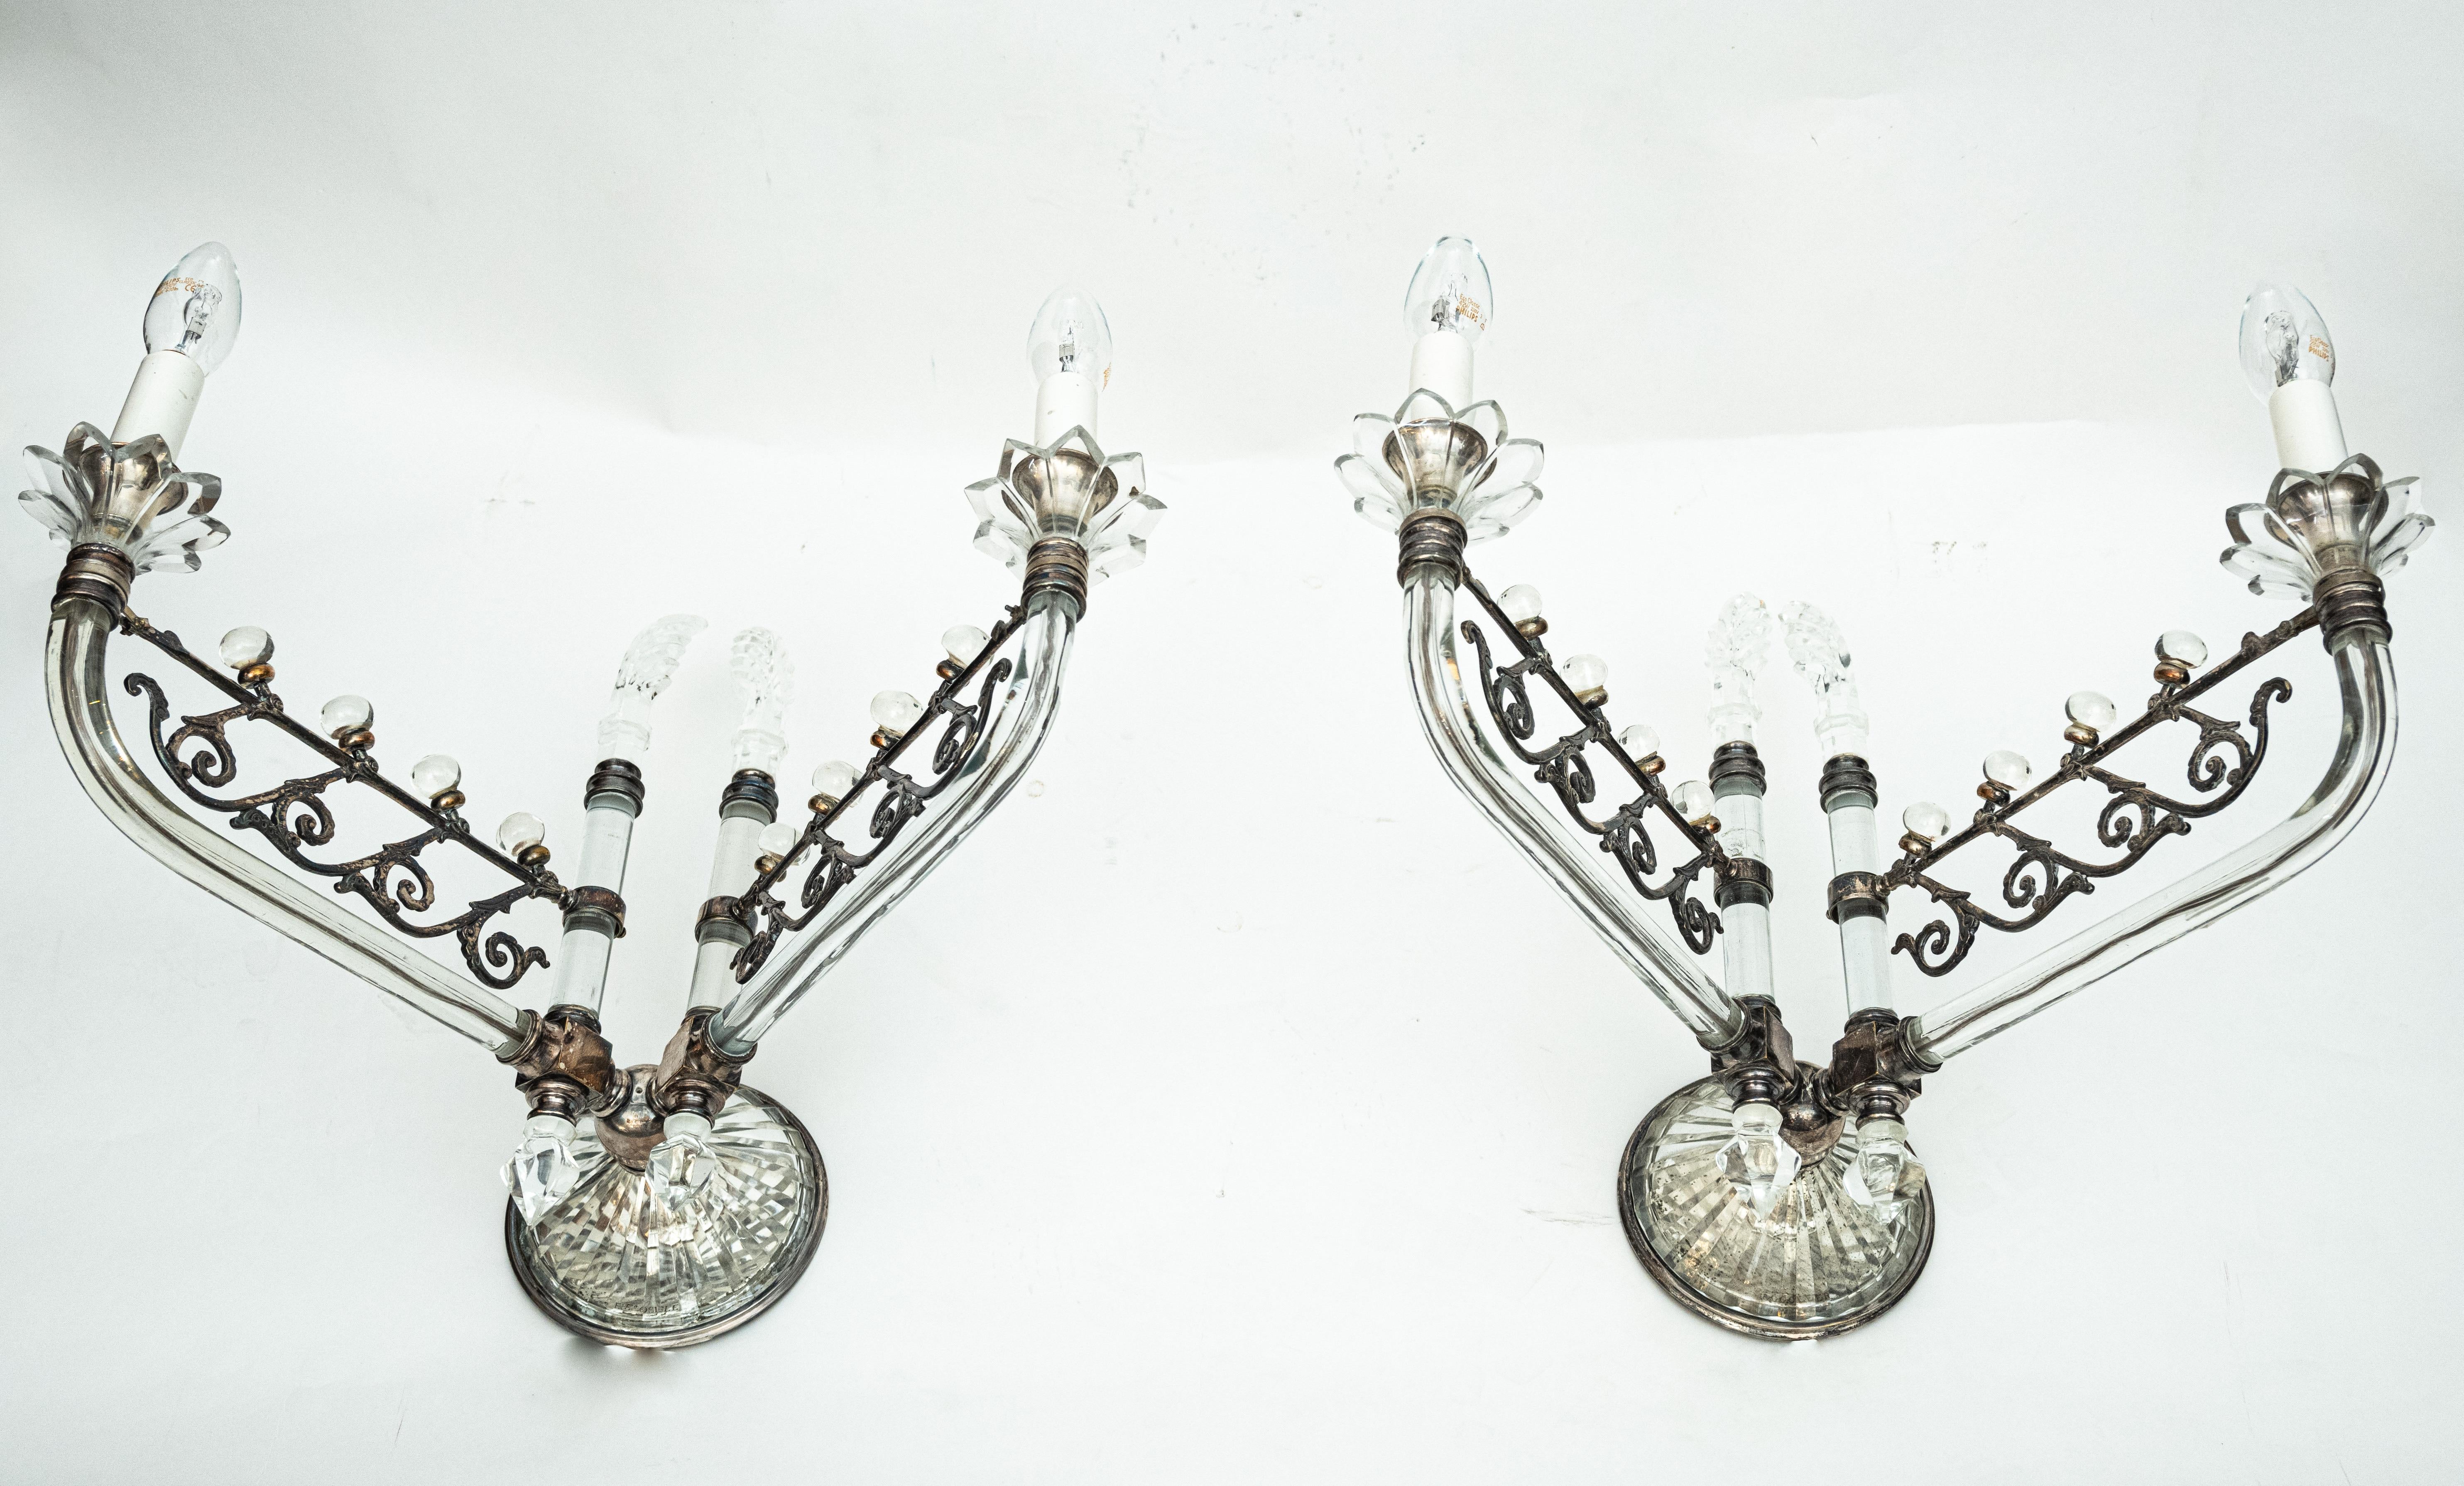 A pair of Edwardian style sconces by F&C Osler. Two silver embellished glass arms support candelabra sockets. Ornate silver lugs terminate in cut crystal elements and the makers mark is visible through the cast backplate. Circa 1910.
